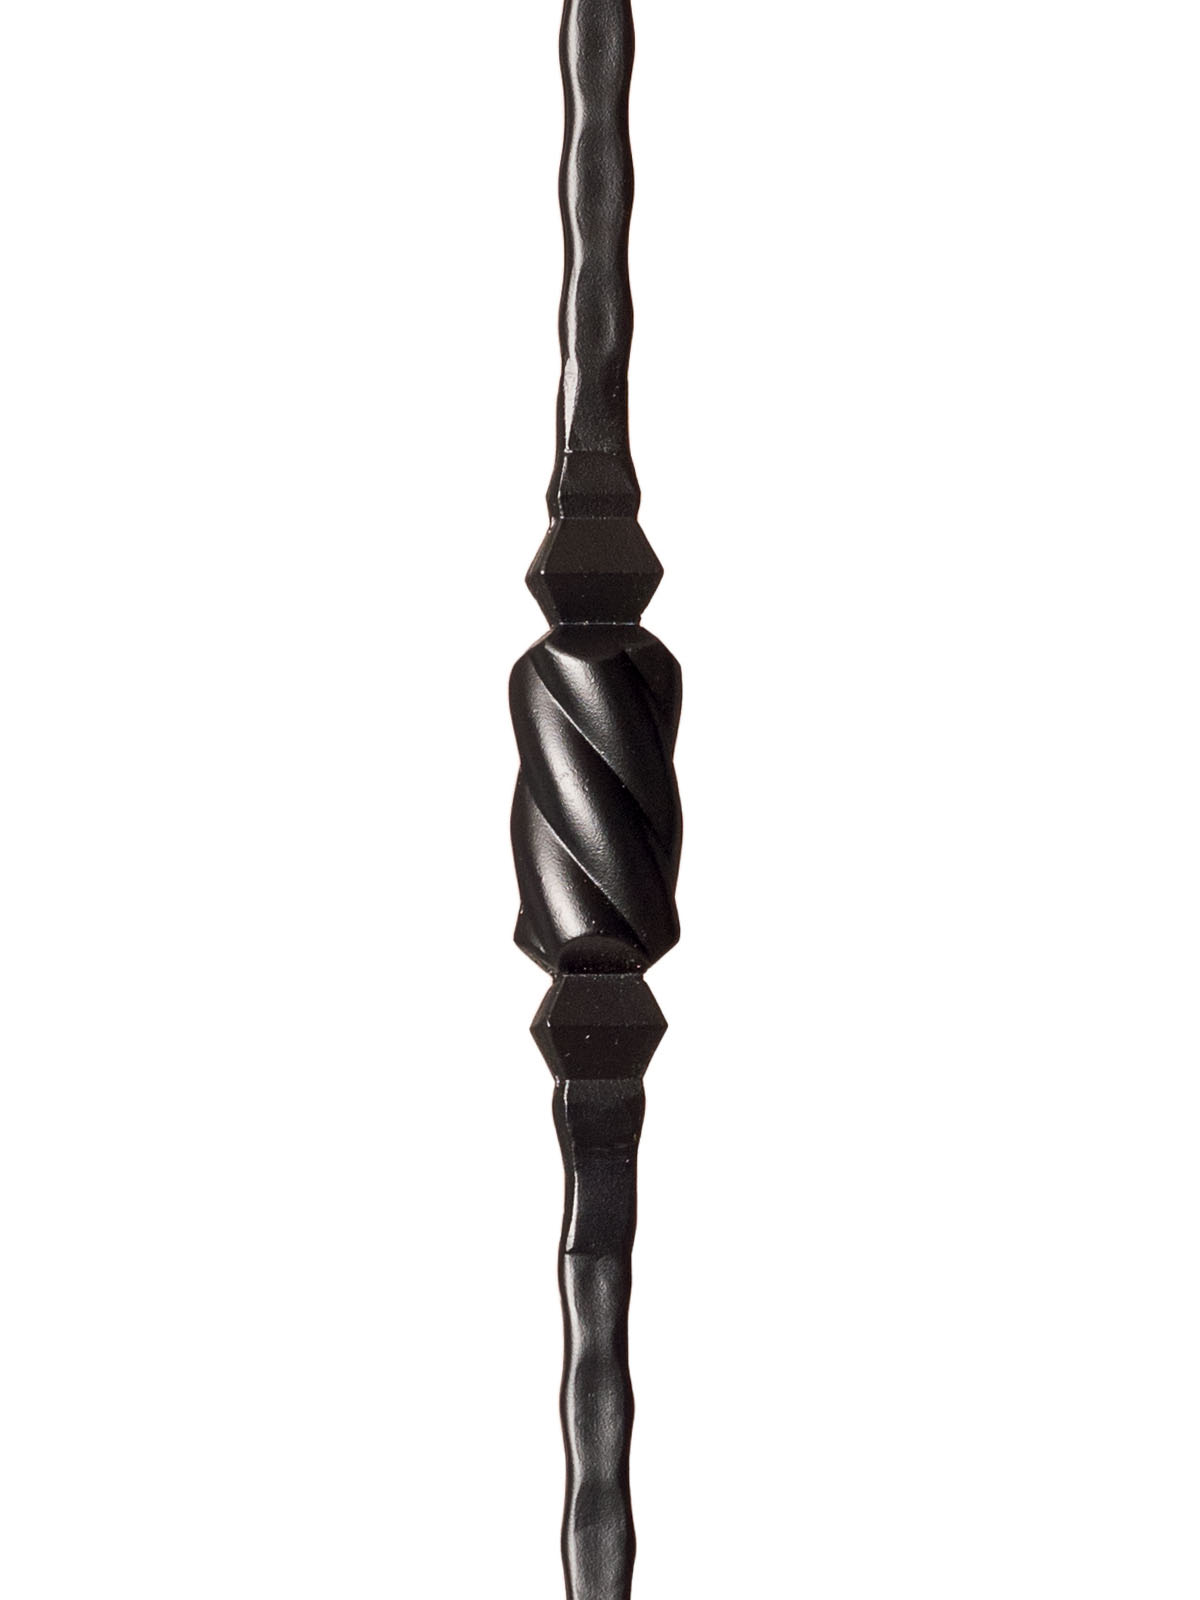 Iron Baluster 9046 - 9/16" Hammered Face - Double Knob